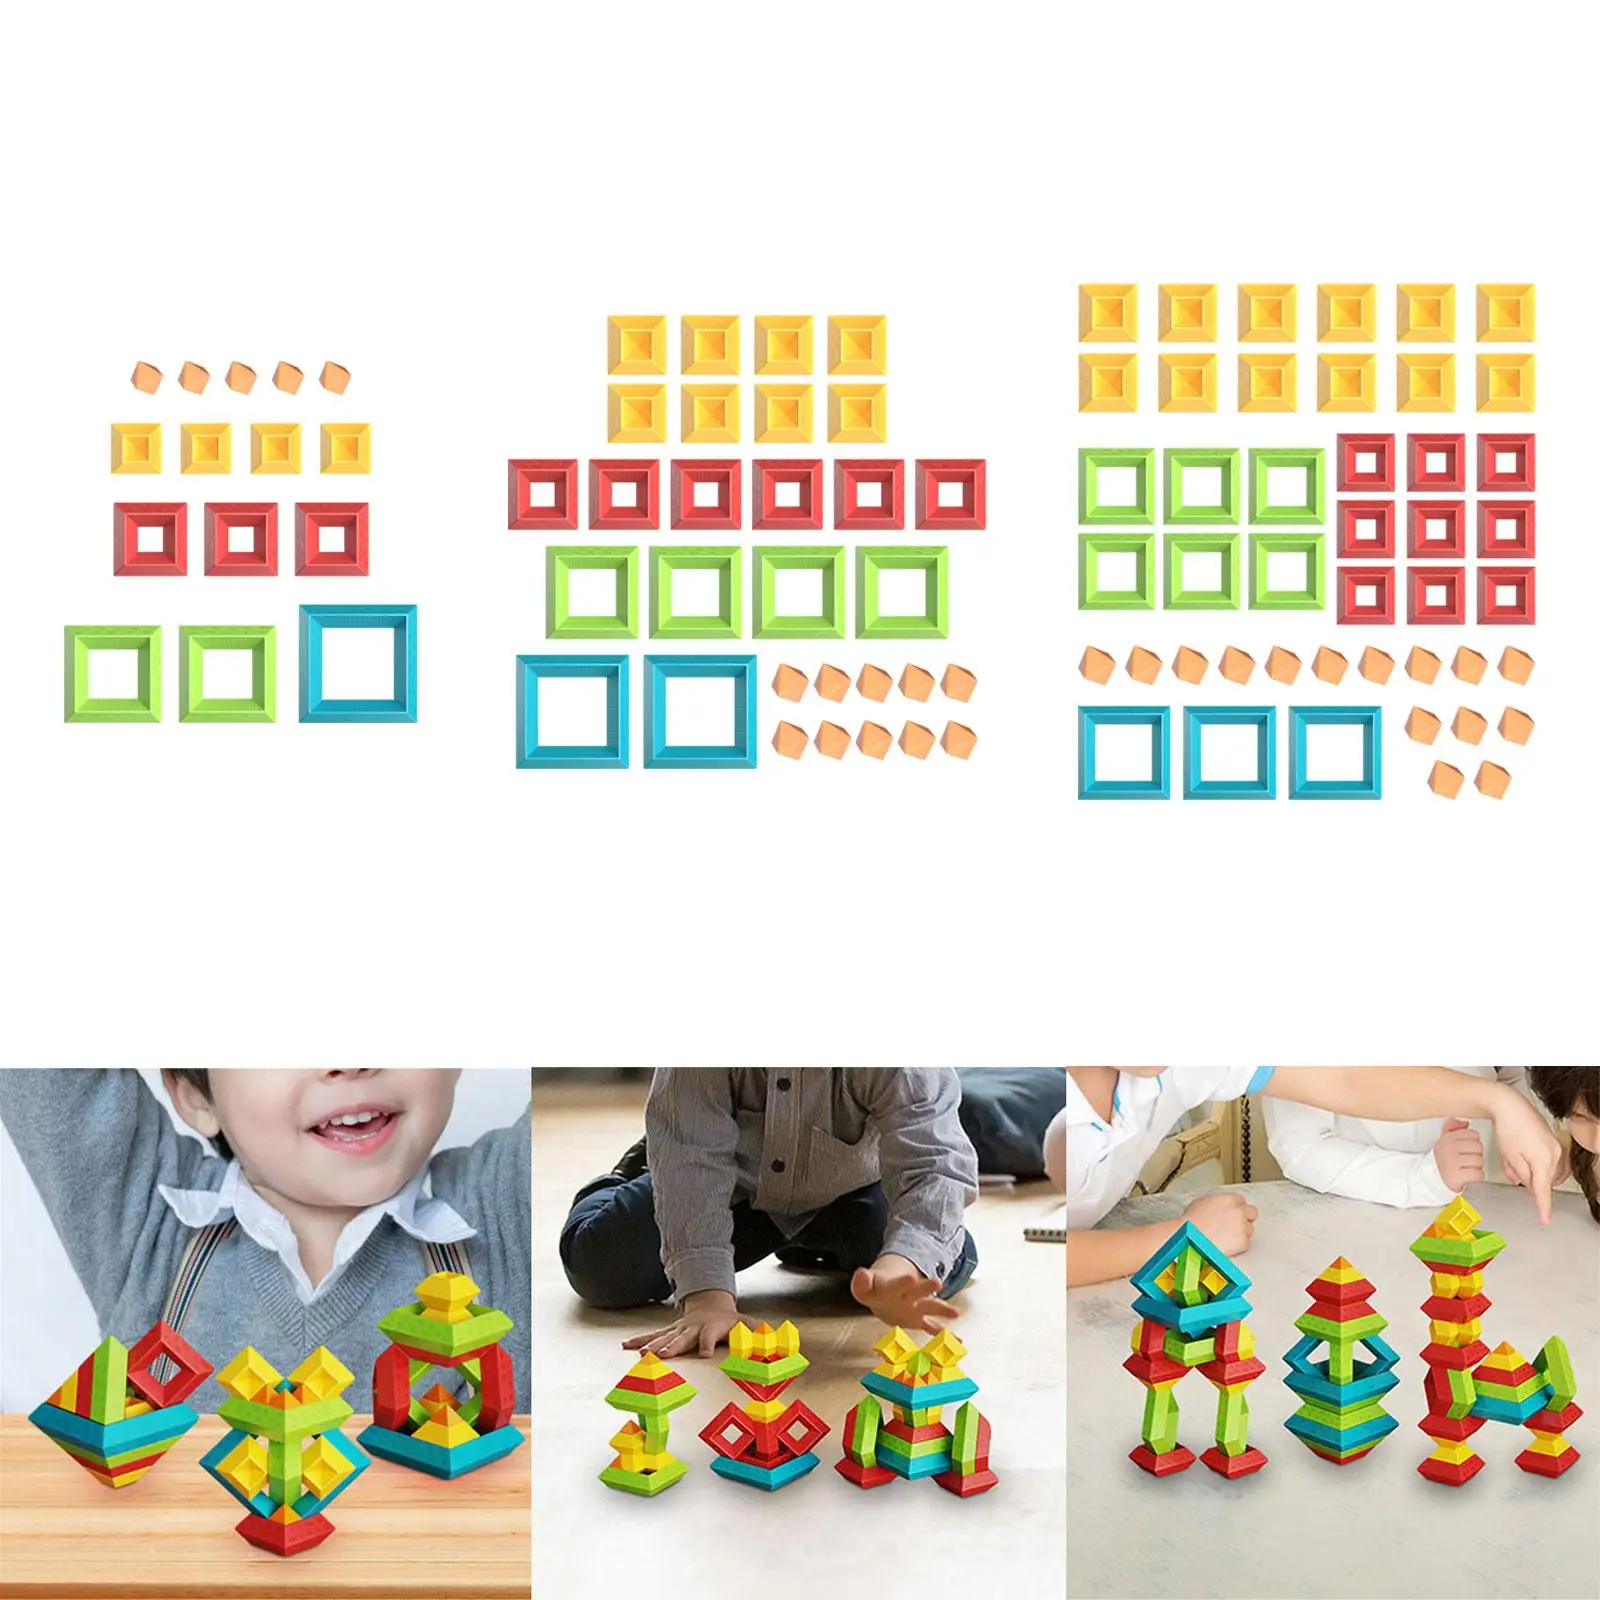 Building Blocks Educational Toys Preschool Stem Geometric Stacking Toy for Children Kids 1 2 3 4 5 Year Old Boys Girls Toddlers